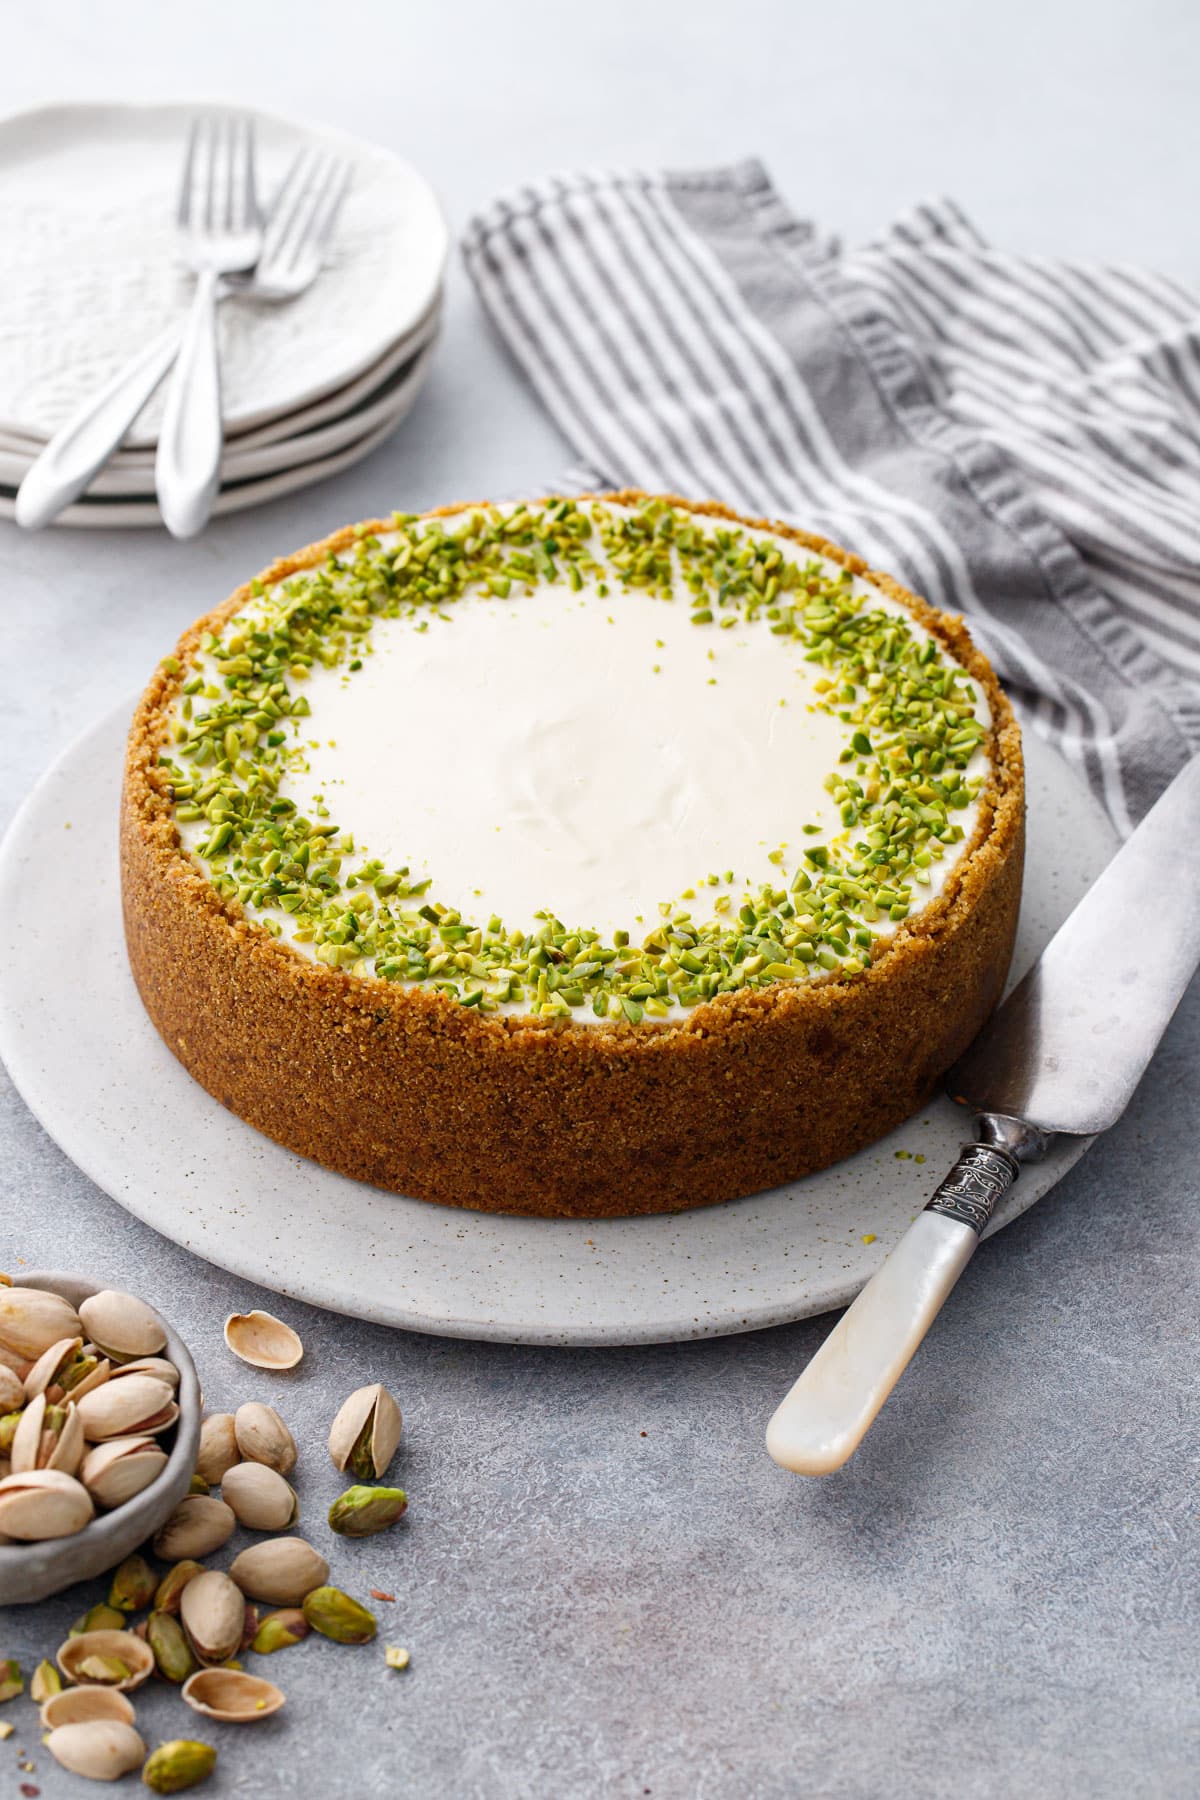 Whole Pistachio Sour Cream Cheesecake before slicing, showing the vanilla wafer crust, sour cream topping, and chopped pistachio garnish.